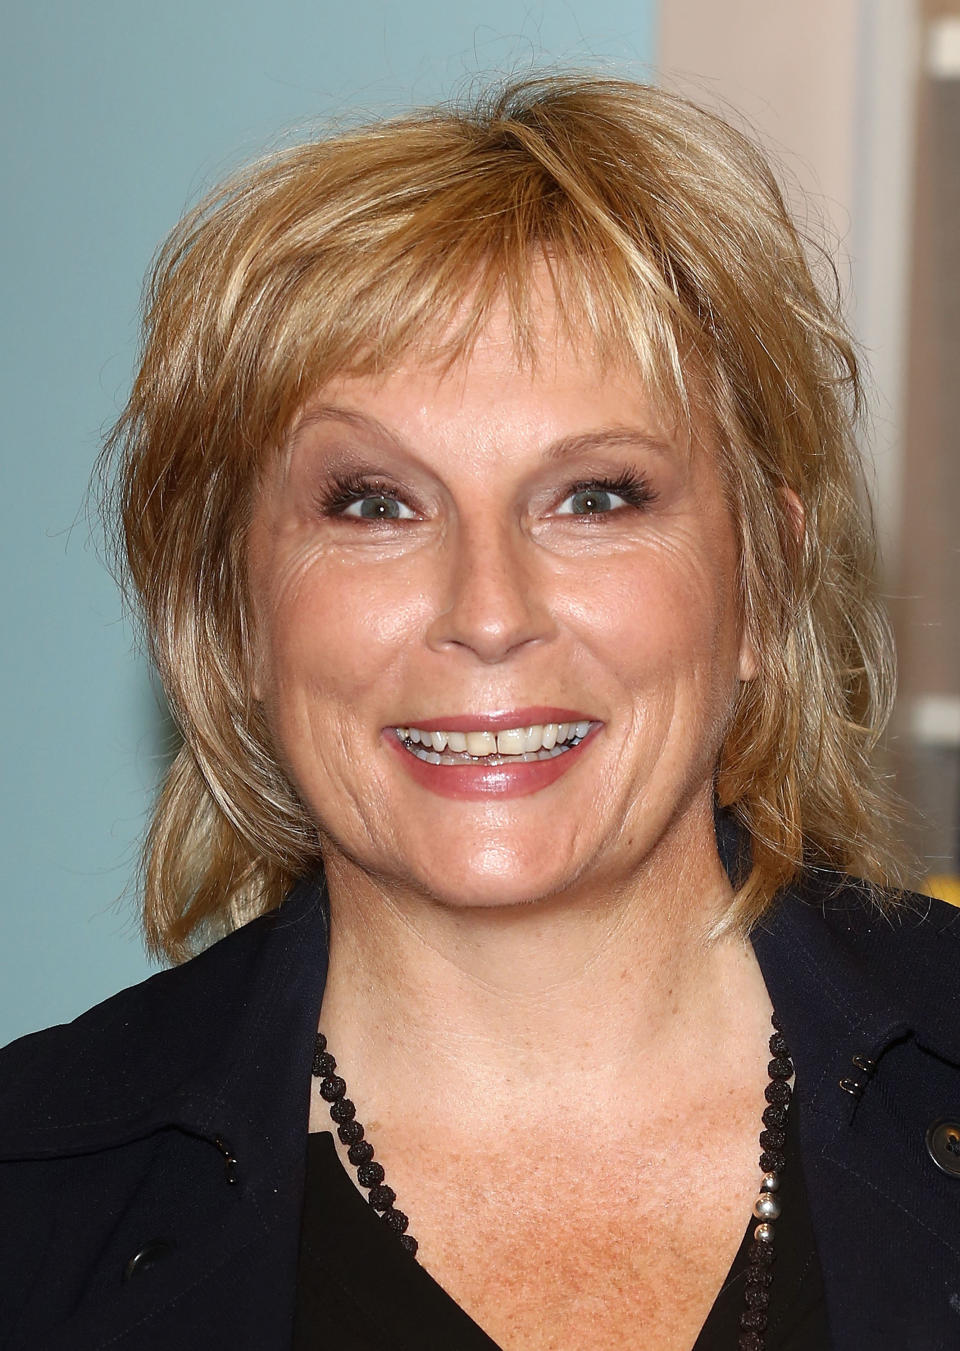 Like many women, Jennifer Saunders thought that because she had no family history of breast cancer, she wasn't at risk of the disease.   So when the comedienne went for a mammogram in 2009, she assumed the results would be clear. She told the Telegraph: "I had no family history of breast cancer and I had breastfed, which I sort of thought exempted you."  But sadly the scan did detect a small cancerous lump. After undergoing a lumpectomy, chemotherapy and radiotherapy, Jennifer went public about her illness in the summer of 2010.   The final part of Jennifer's treatment involved taking the drug Tamoxifen, which plunged her into the menopause and subsequently a bout of depression.   But four years on, the BAFTA-winning writer is in good health: "I'm pleased to say that life is good again," she told the Telegraph.